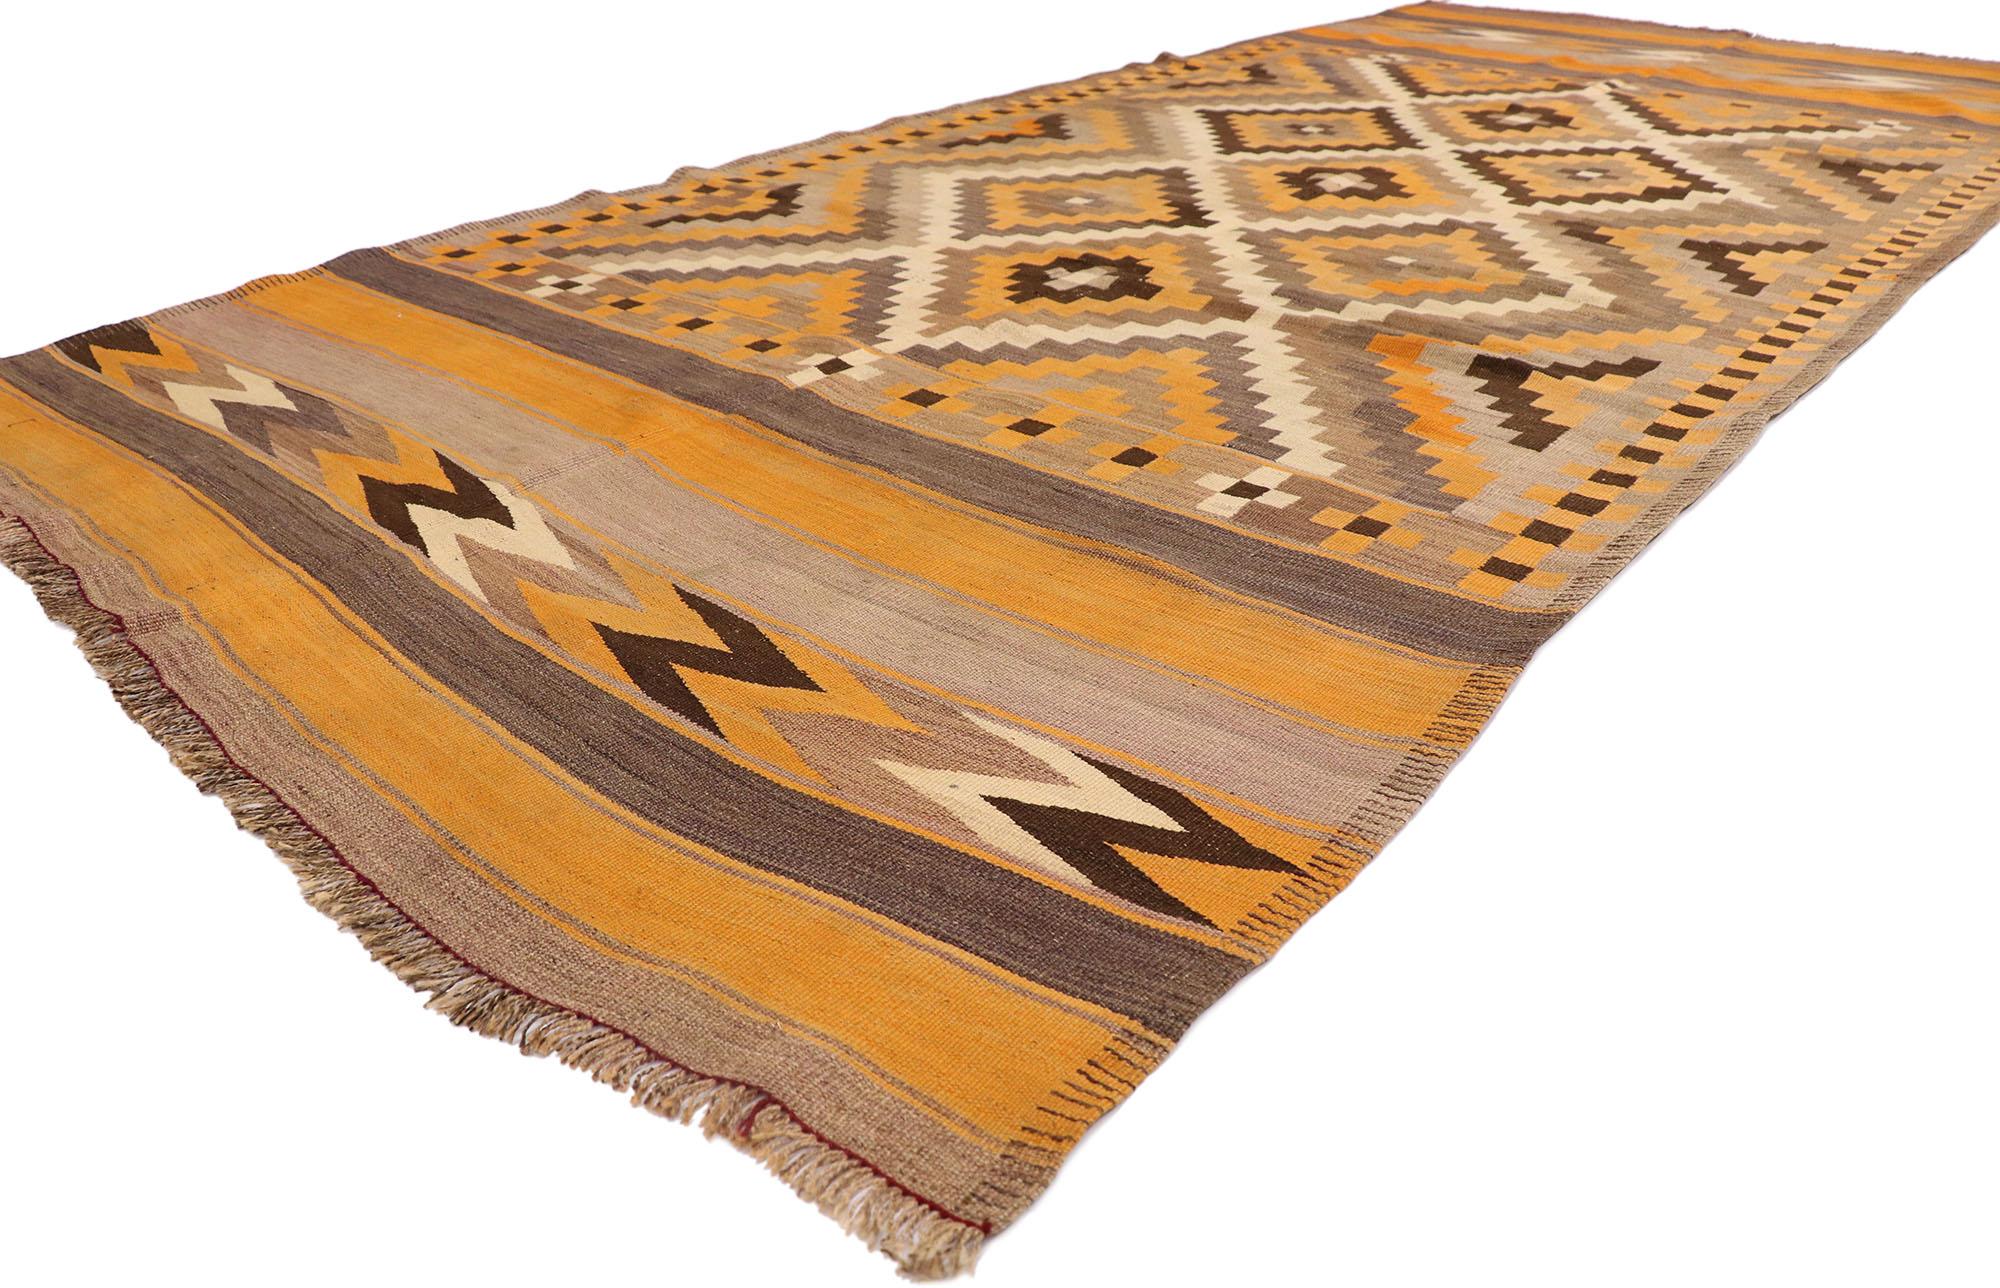 78011 vintage Afghan Maimana Kilim rug with Bohemian Southwestern style 05'04 x 12'00. Full of tiny details and a bold expressive design combined with vibrant colors and tribal style, this hand-woven wool vintage Afghani Maimana kilim rug is a